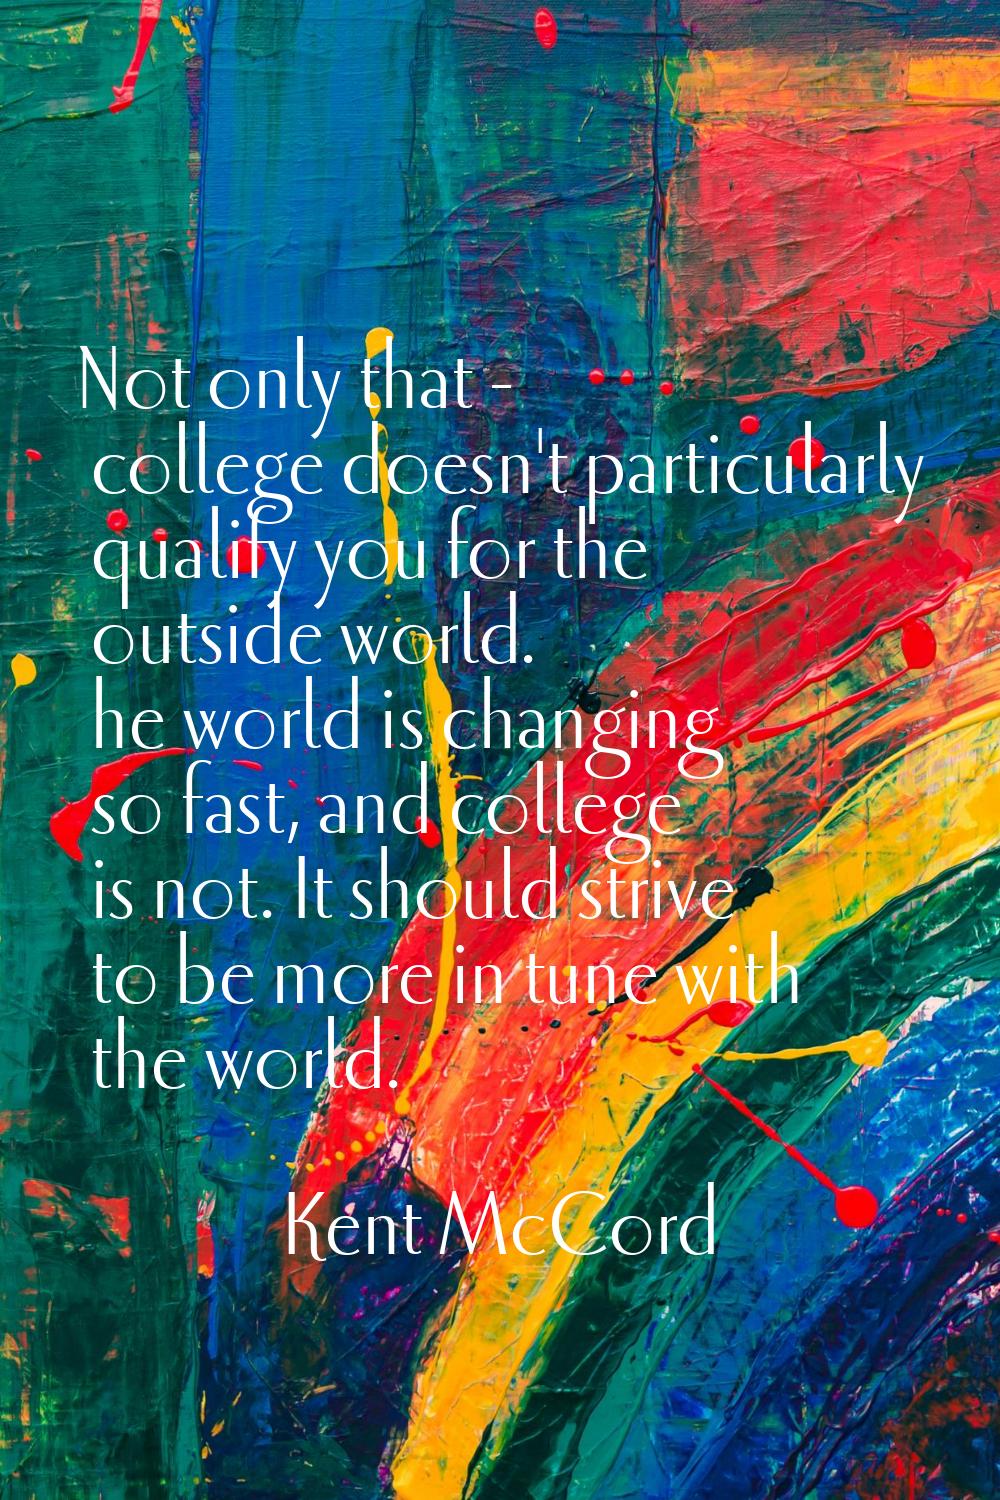 Not only that - college doesn't particularly qualify you for the outside world. he world is changin